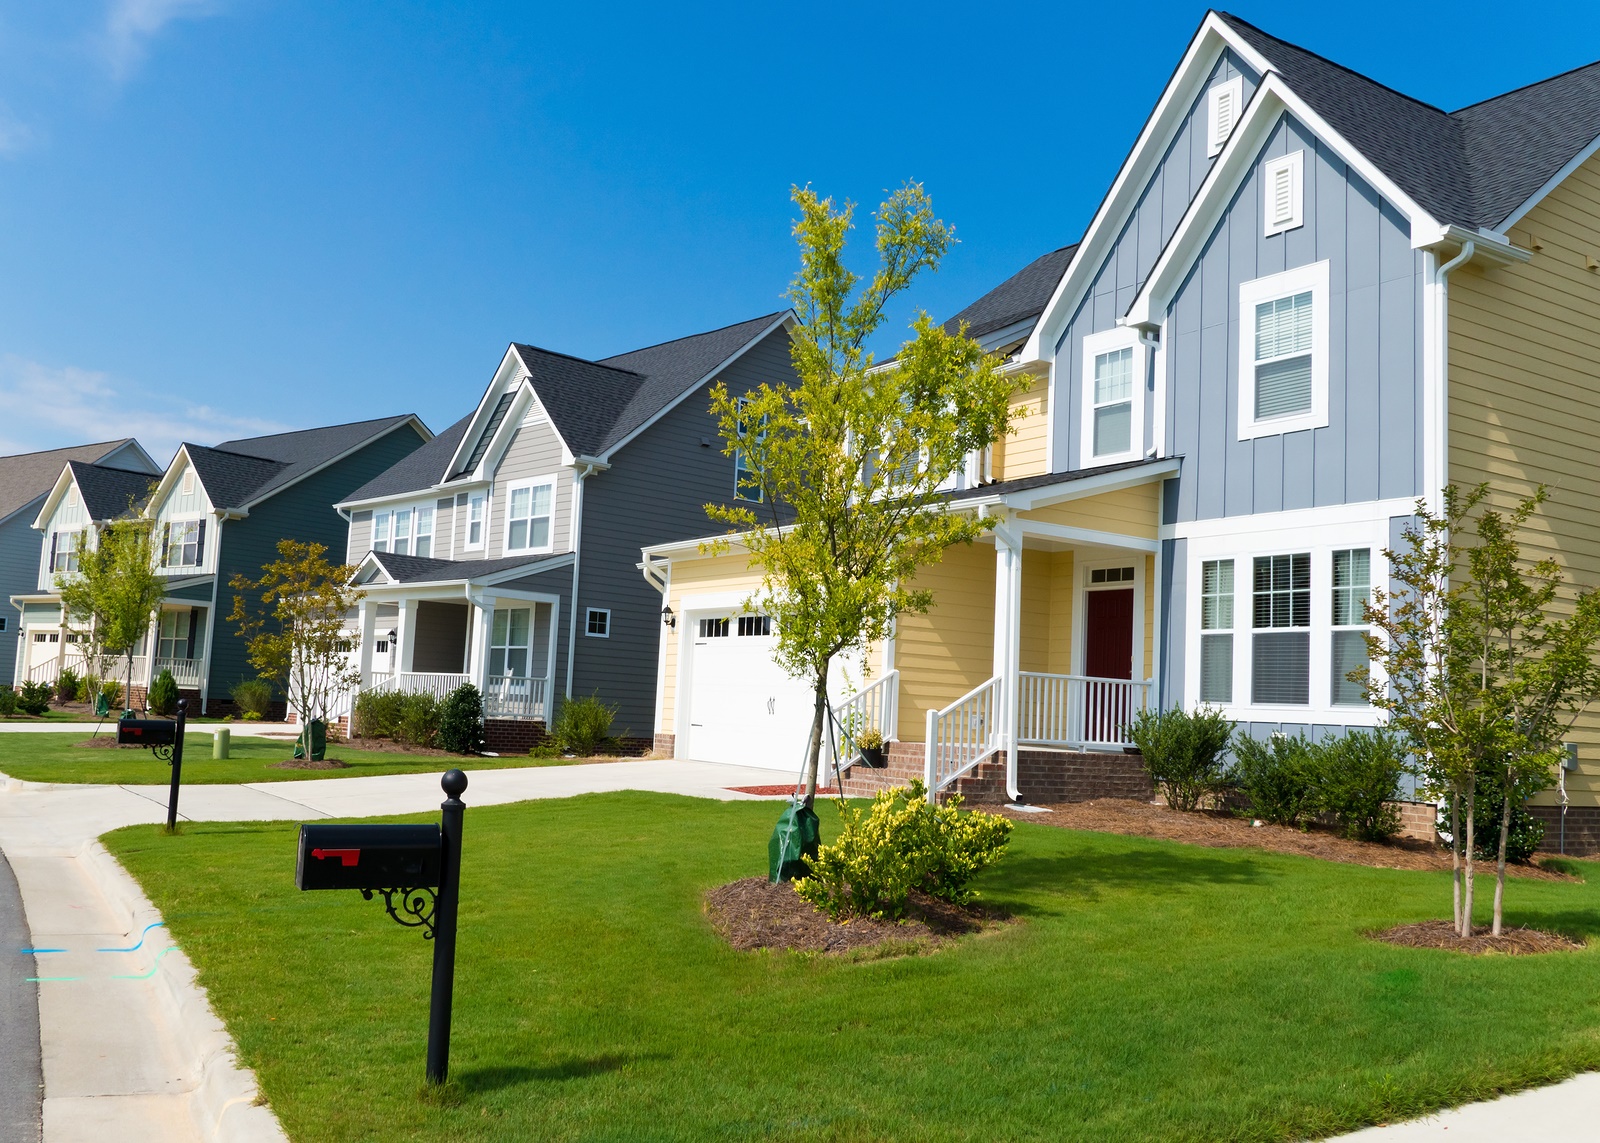 3 Things to Know About an HOA